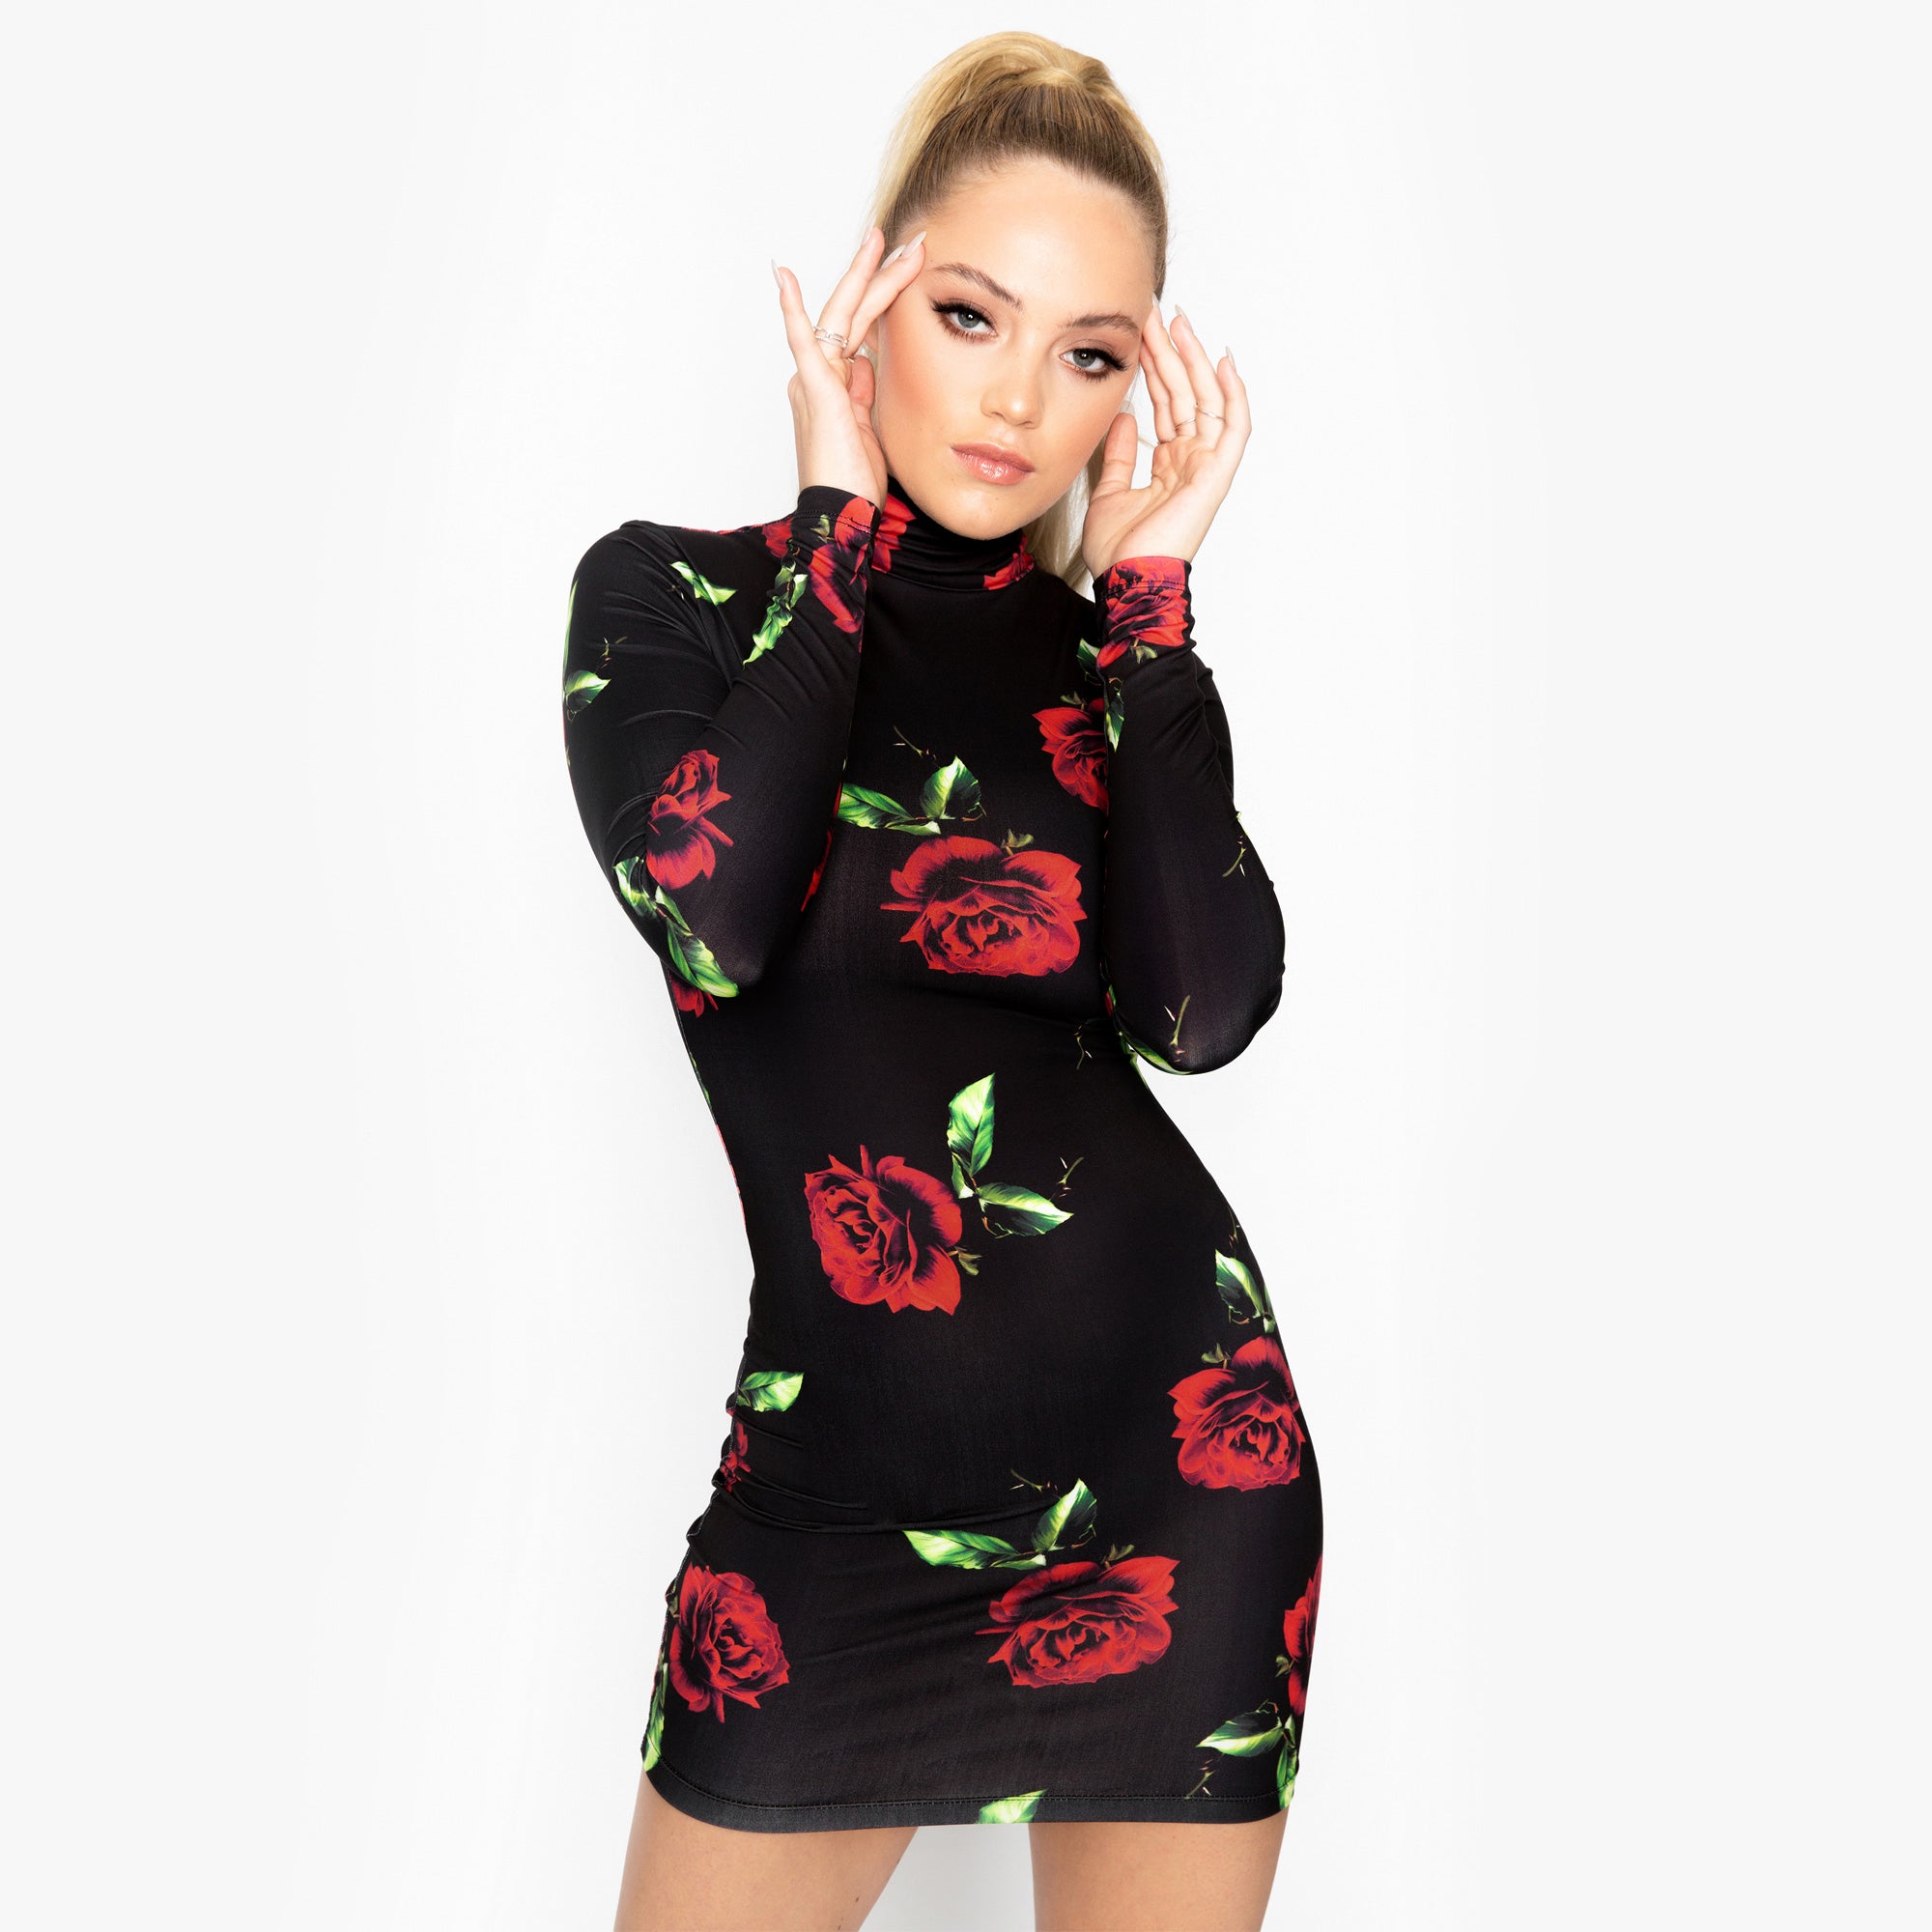 Dress – Red Official Girl Rose Jersey